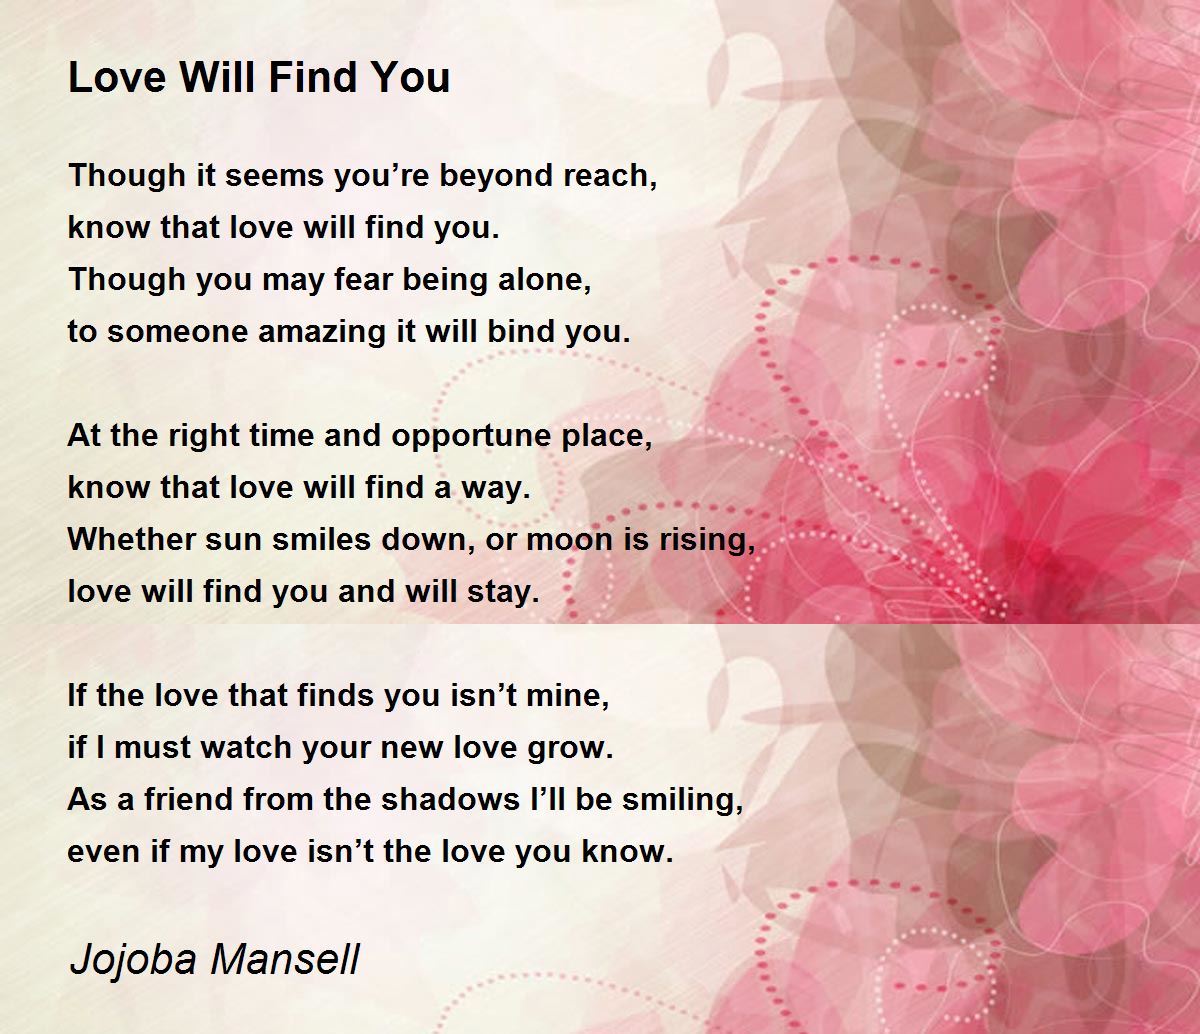 Eventually love will find you.  Love you poems, Love will find